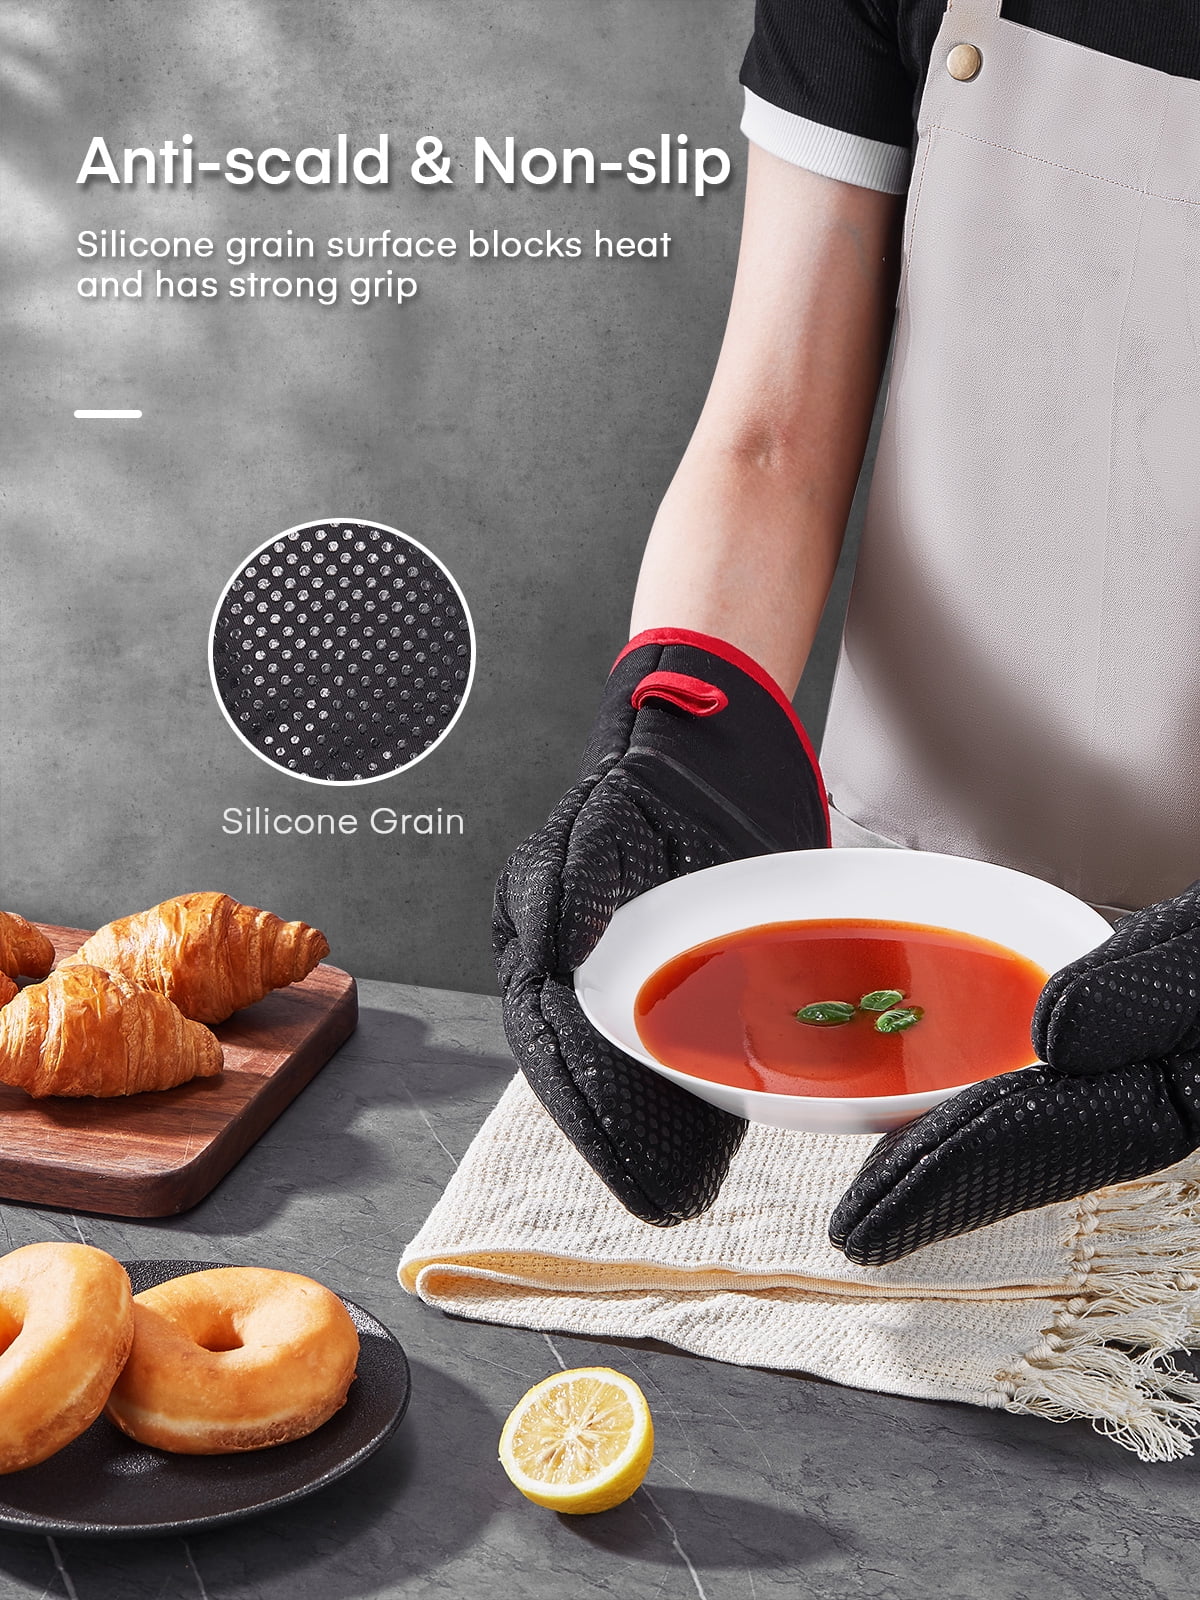 Bestonzon 4pcs Heat Resistant Oven Mitts and Pot Holders Soft Cotton Lining with Non-Slip Surface for Safe BBQ Cooking Baking Grilling (Black)